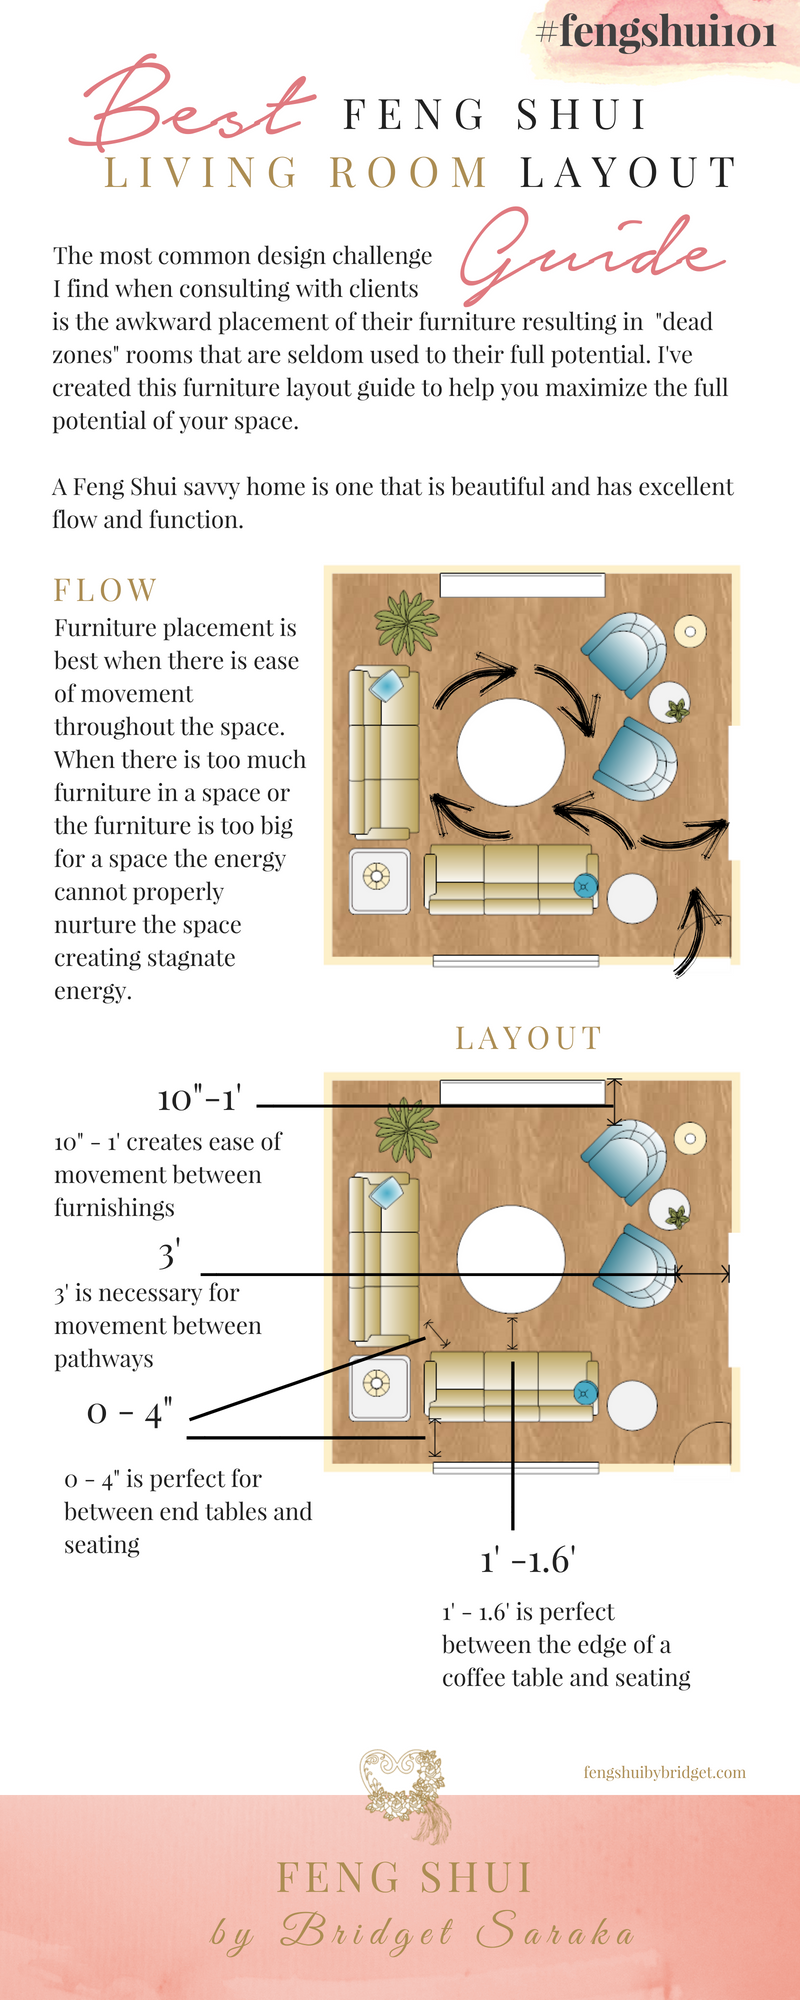 The Best Feng Shui Living Room Layout Guide Fengshui101 Feng